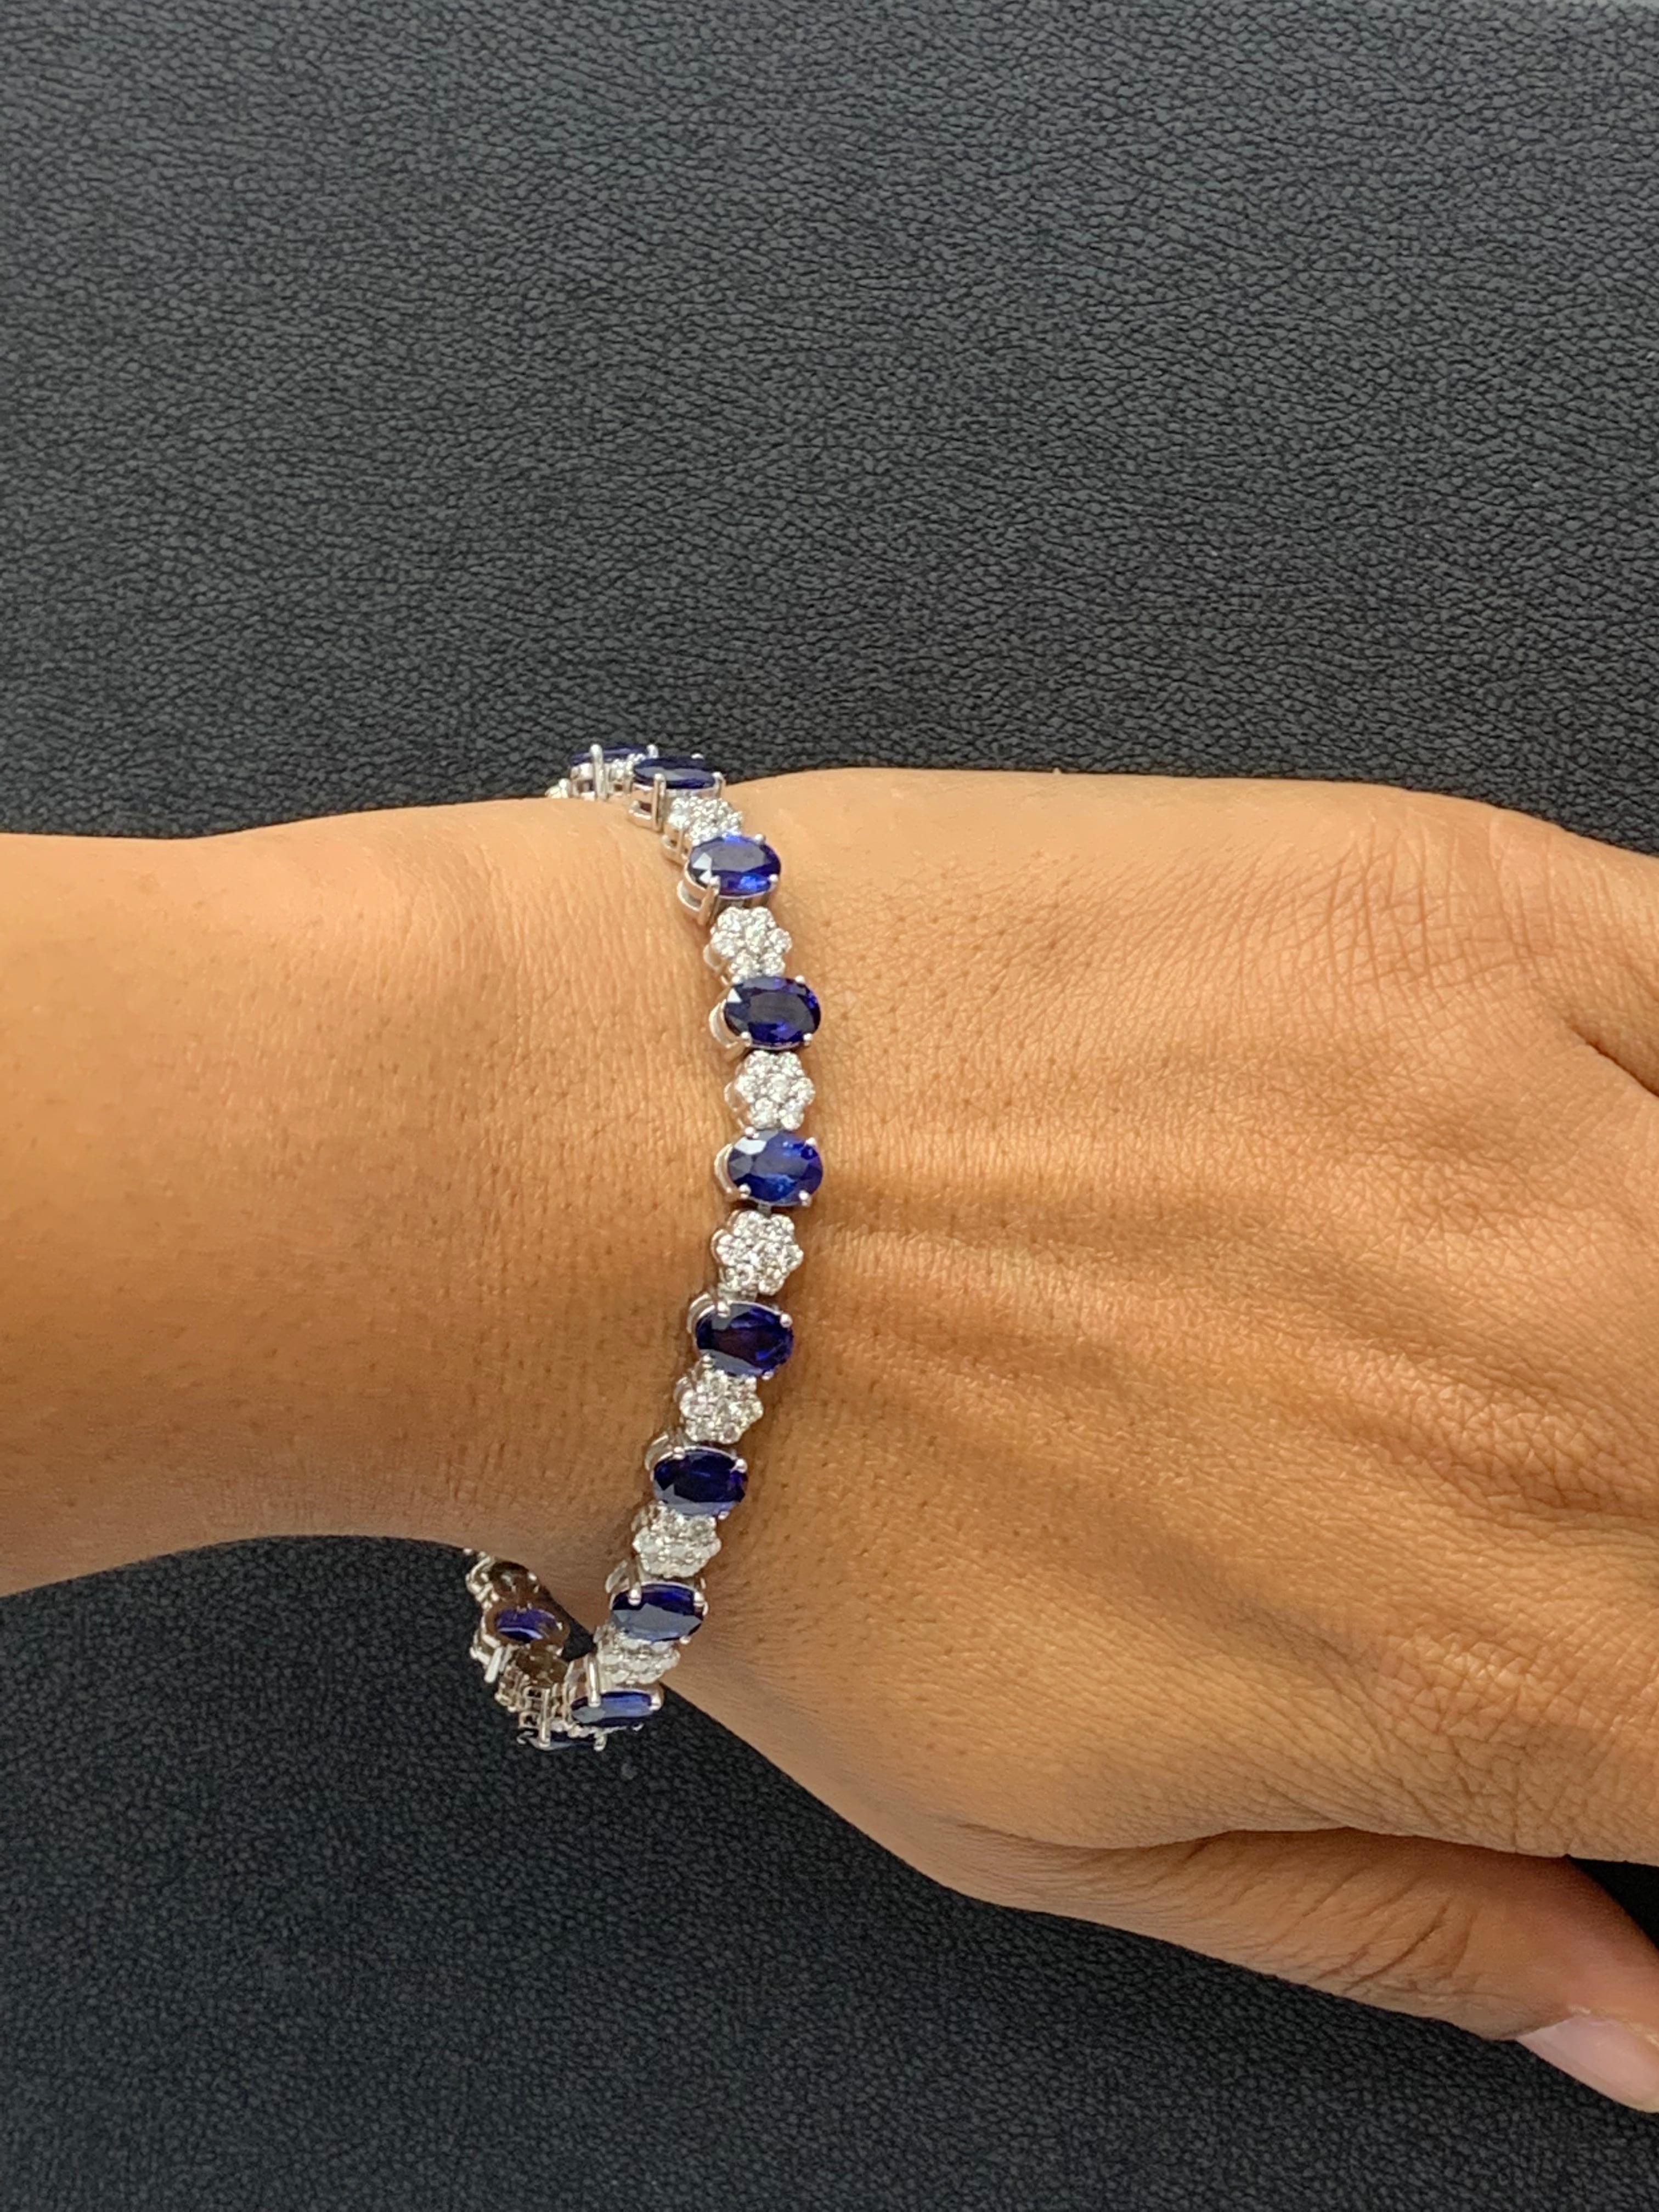 A fashionable and color-rich tennis bracelet showcasing oval cut 17 Blue Sapphires weighing 15.26 carats total, spaced by 119 flower shape round brilliant diamonds weighing 3.16 carats total. Made in 14k white gold.

All diamonds are GH color SI1